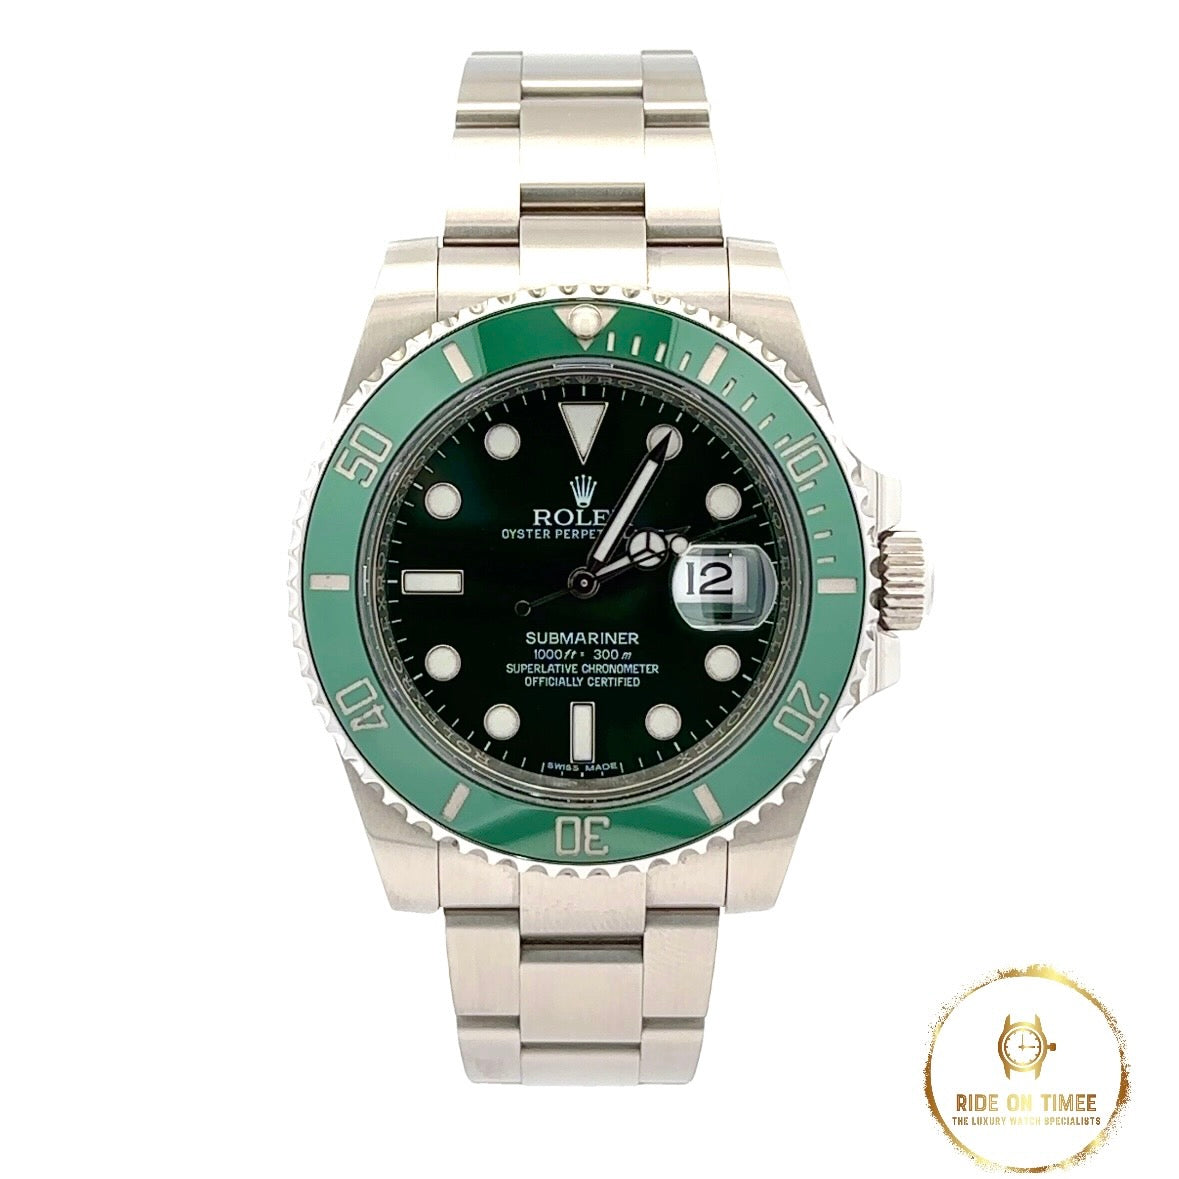 Rolex Submariner Date Discontinued 116610LV ‘Hulk’ - Ride On Timee